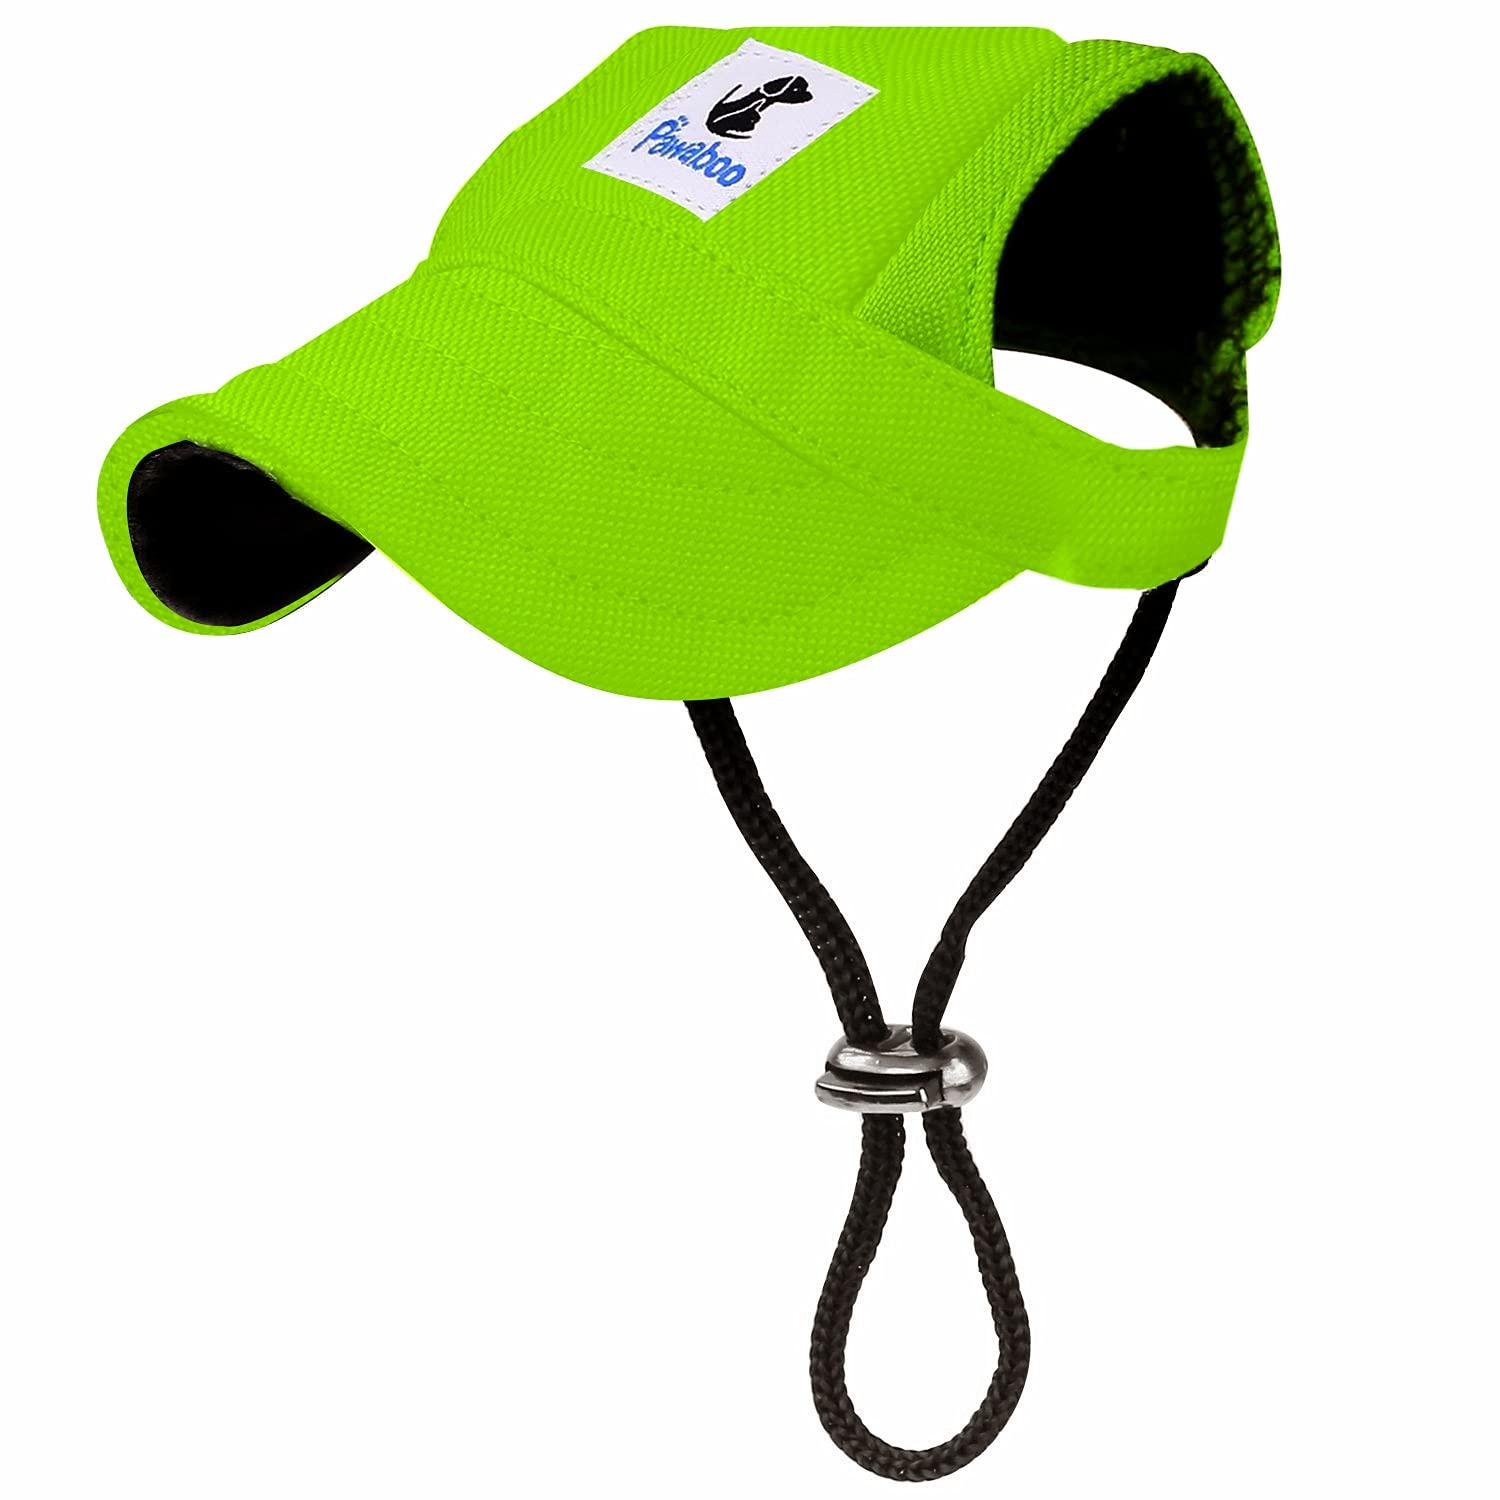 Pawaboo Dog Baseball Cap, Adjustable Dog Outdoor Sport Sun Protection Baseball Hat Cap Visor Sunbonnet Outfit with Ear Holes for Puppy Small Dogs, XL, Green